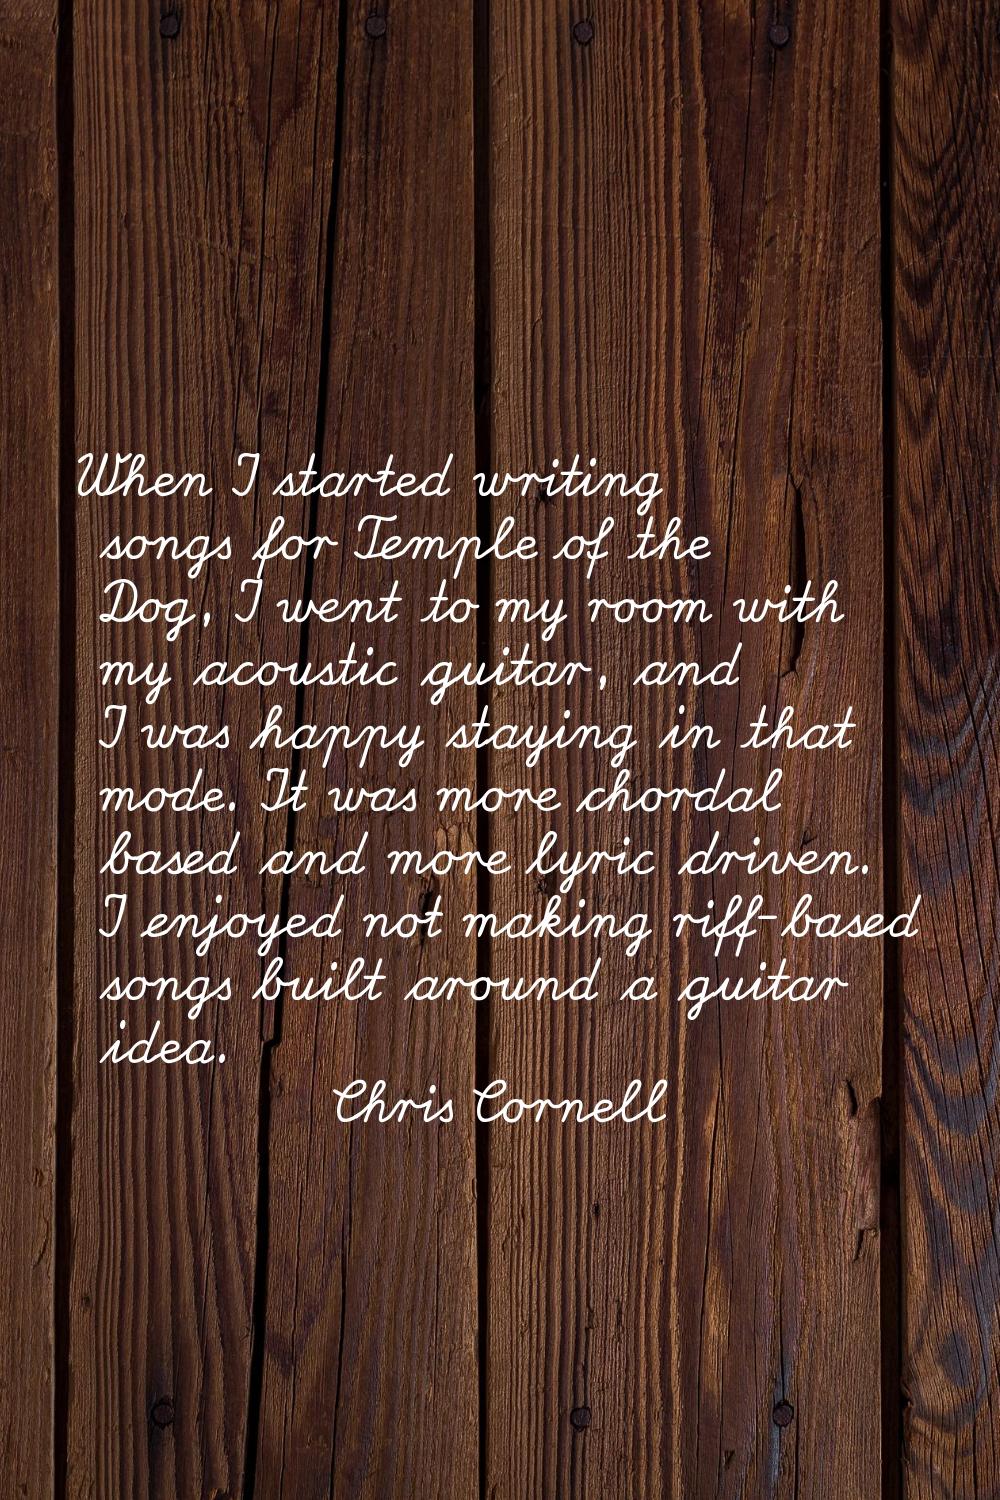 When I started writing songs for Temple of the Dog, I went to my room with my acoustic guitar, and 